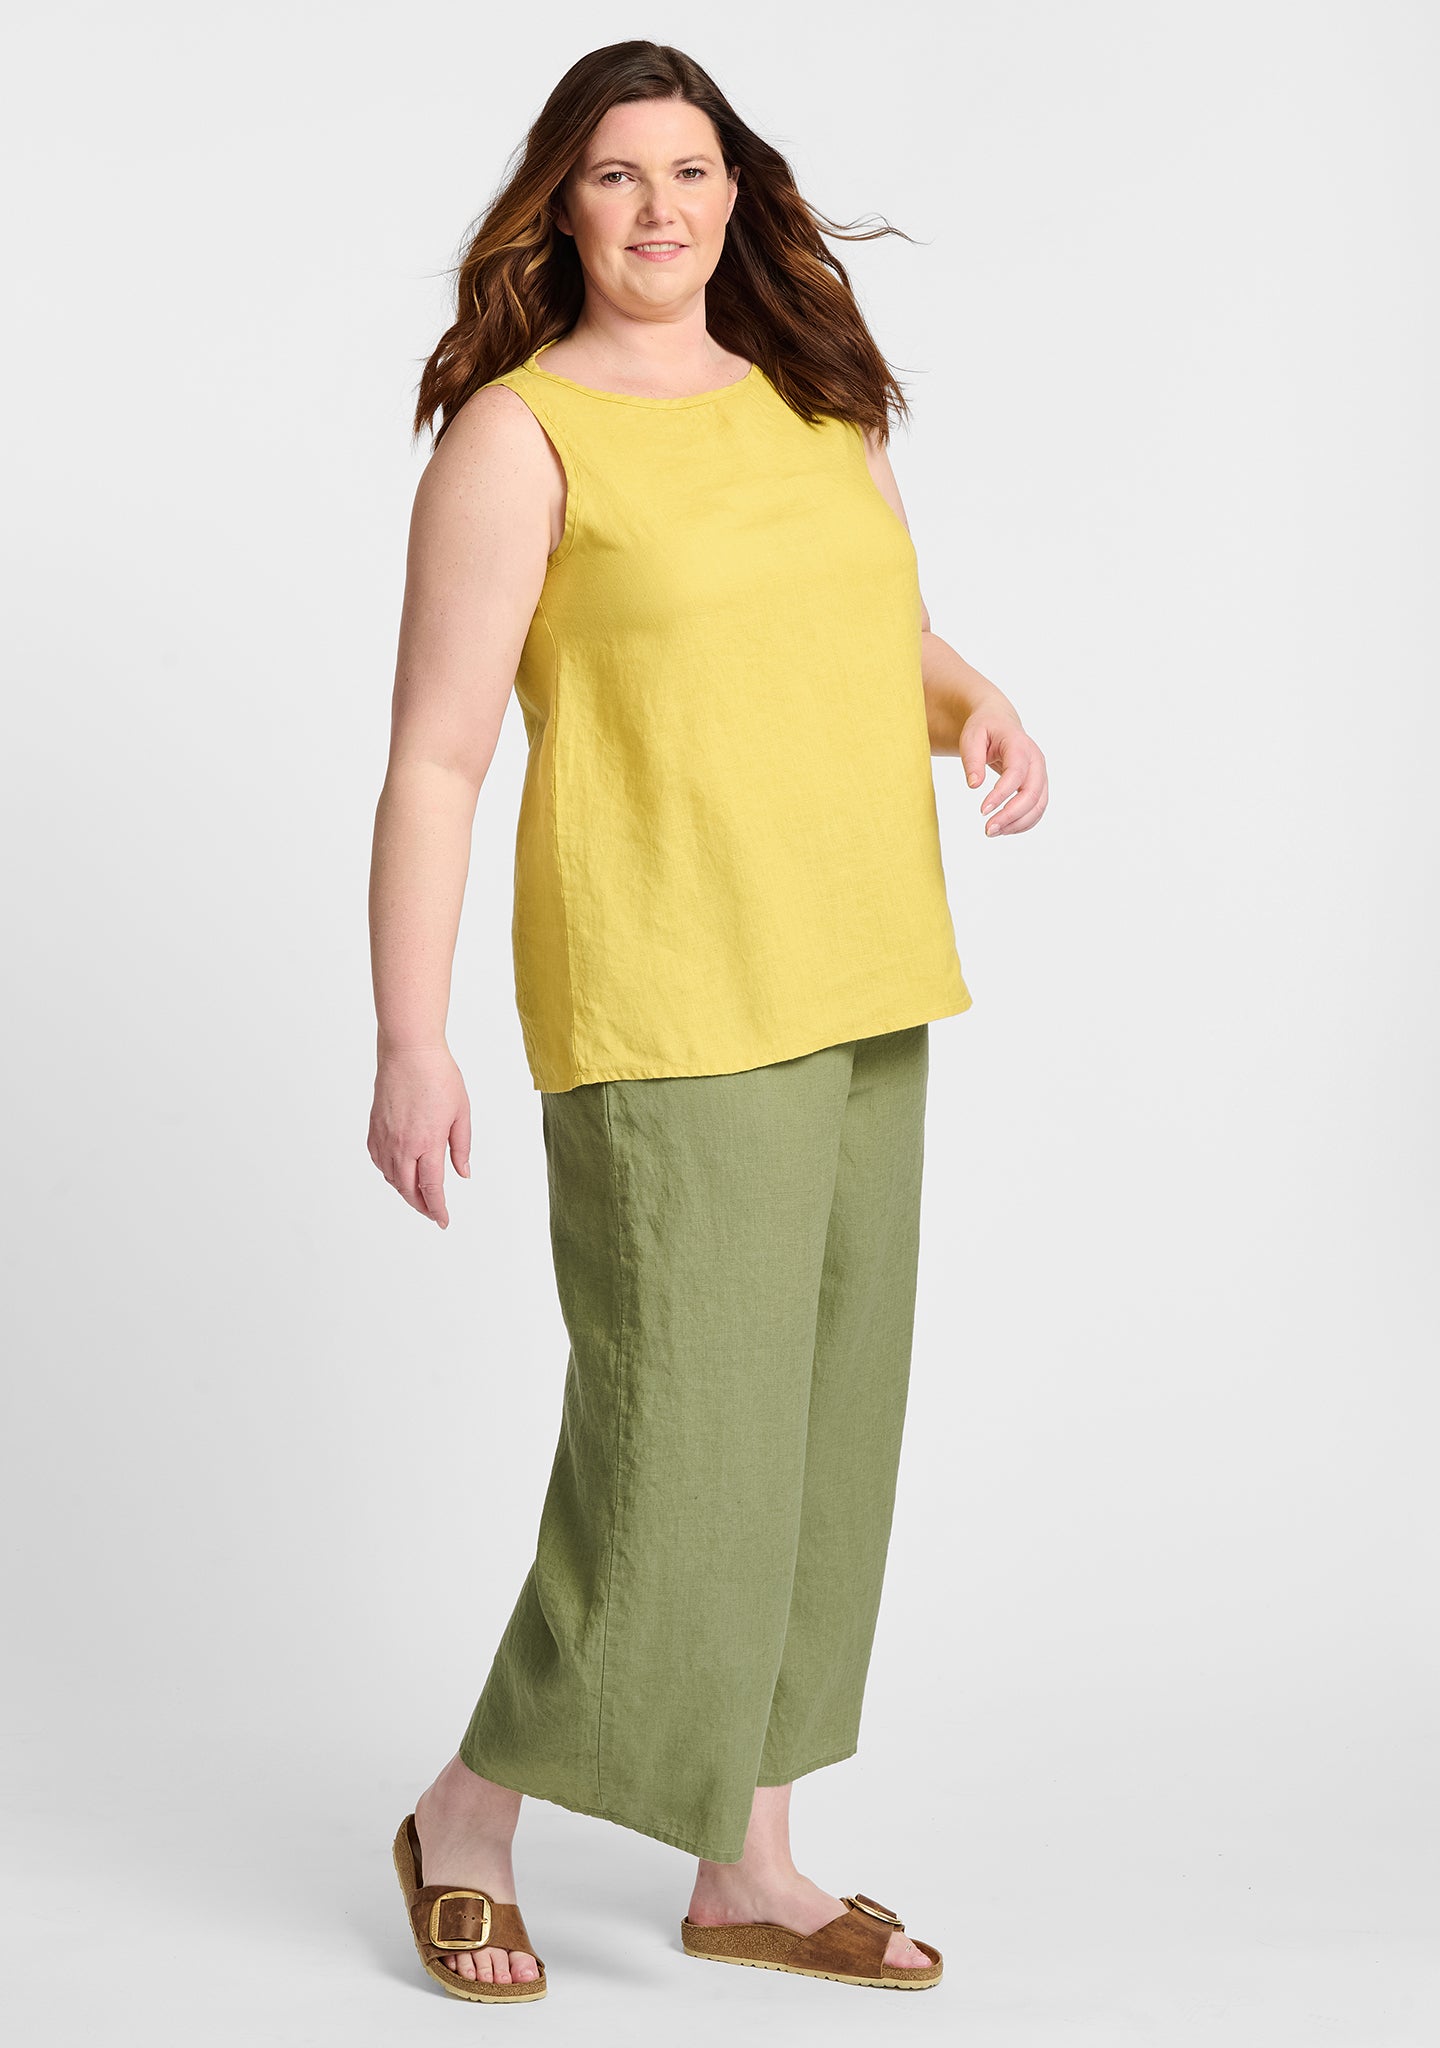 FLAX linen tank in yellow with linen pants in green